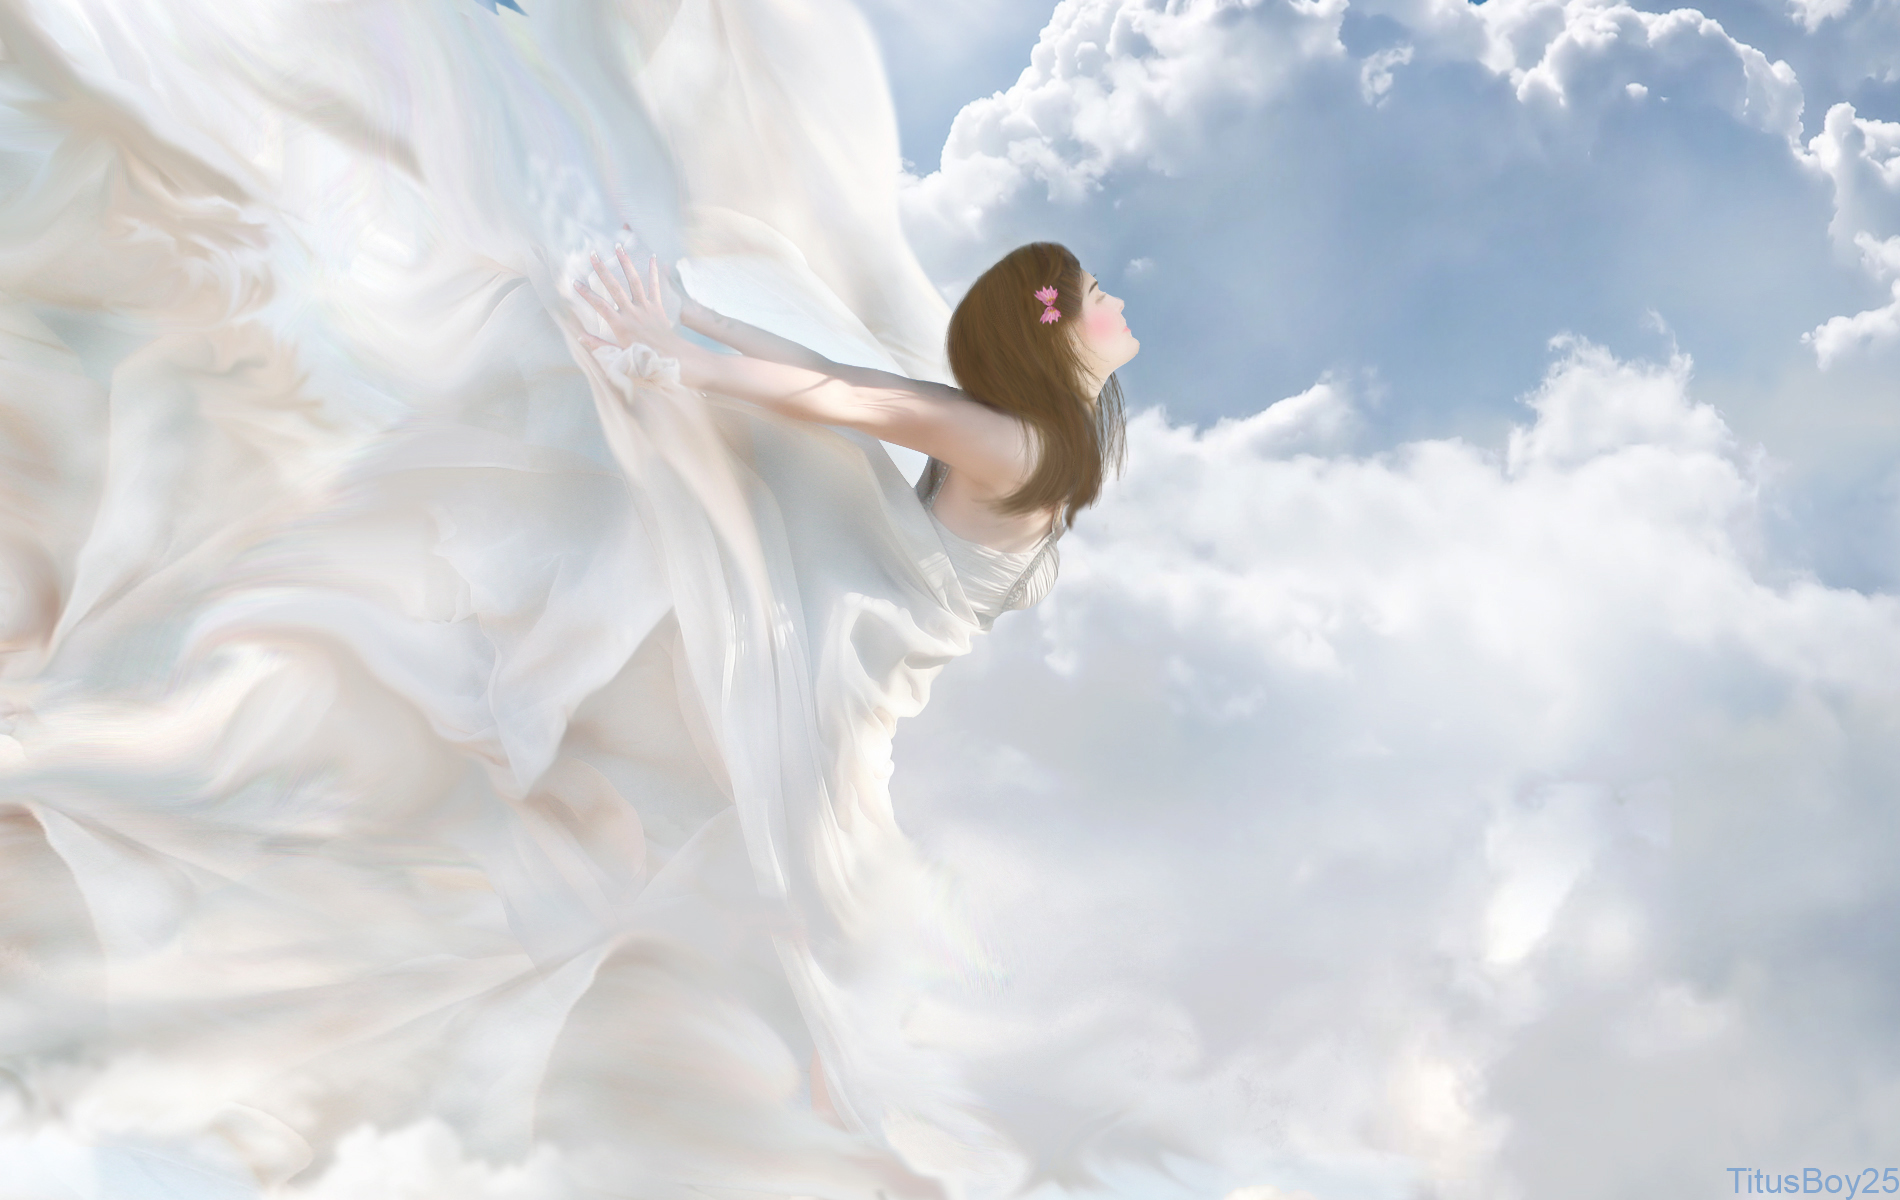 download angels in heaven wallpaper gallery on angels from heaven wallpapers